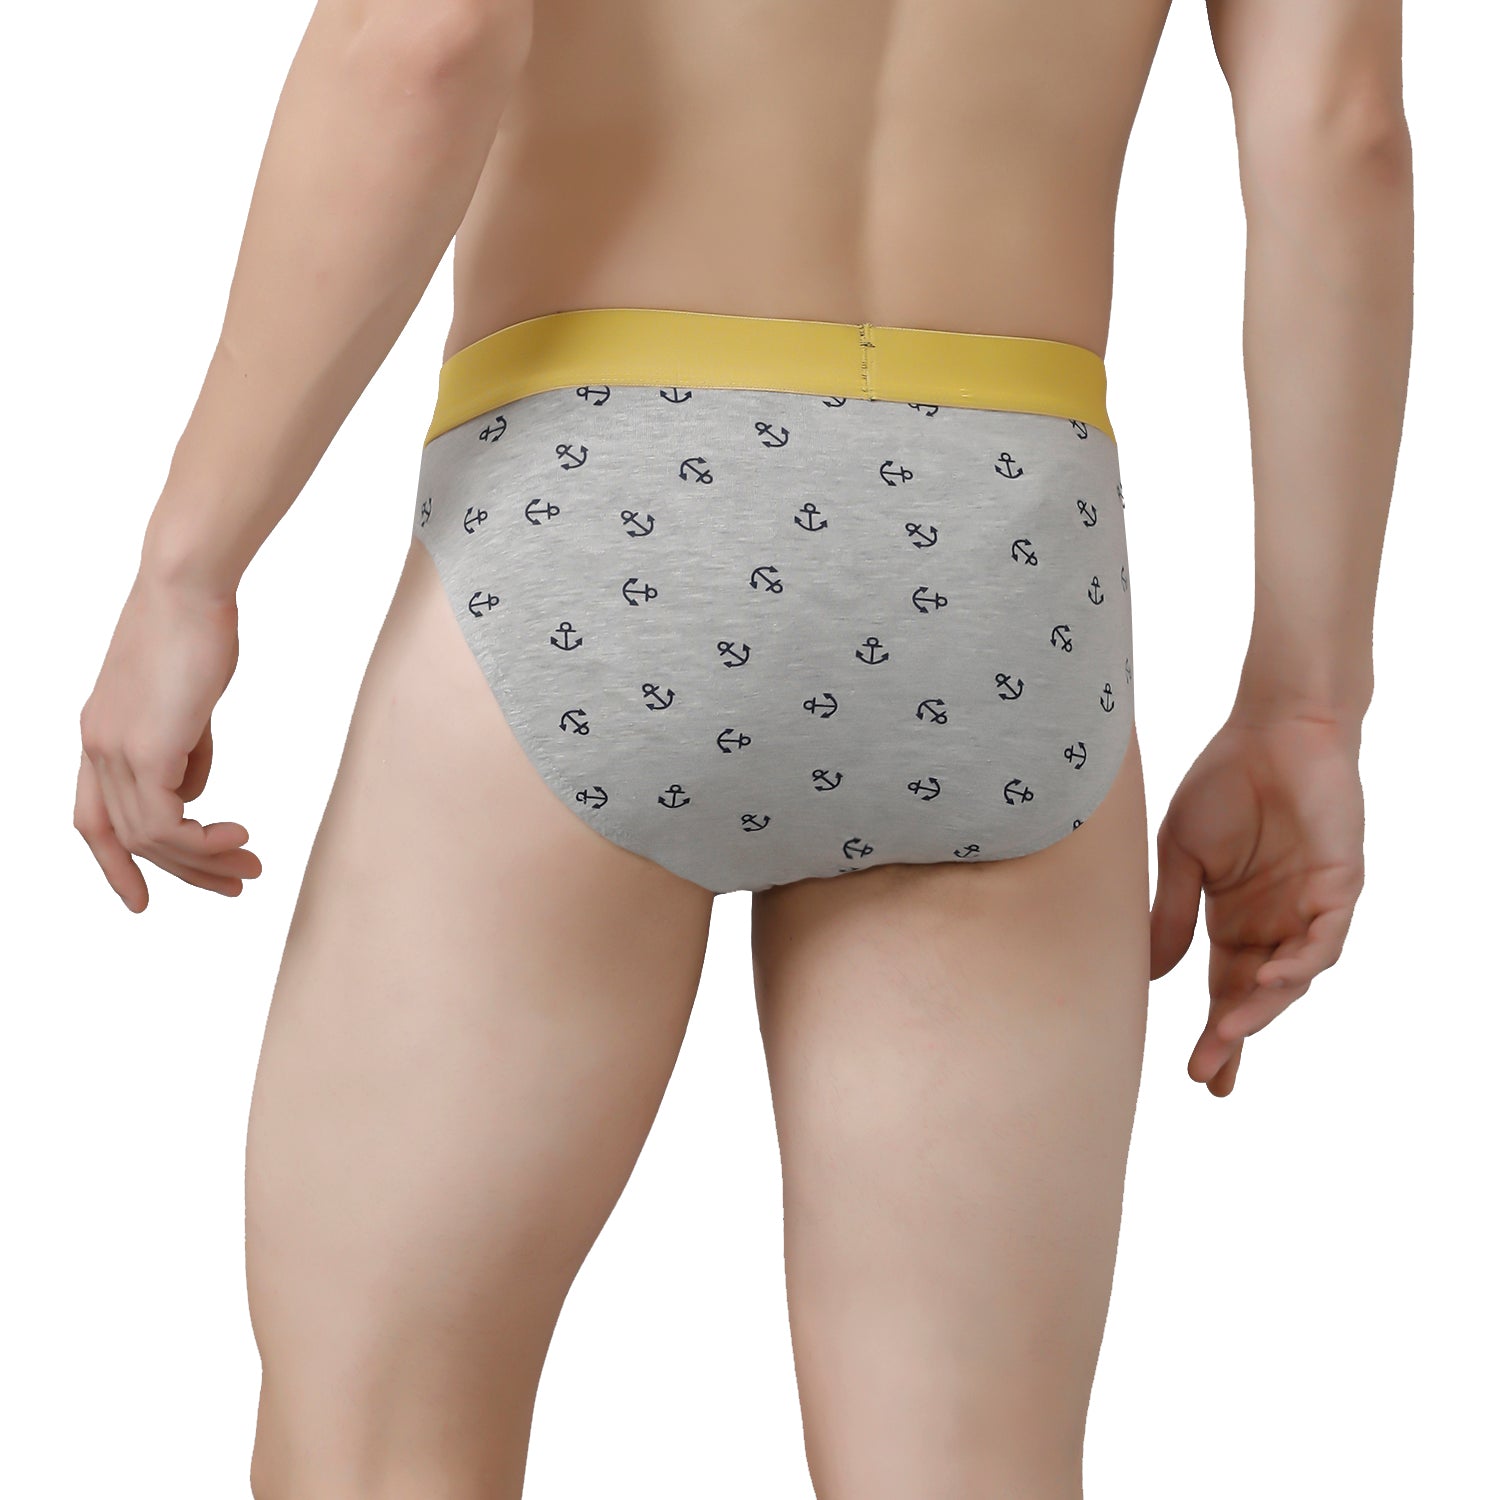 Buy CP BRO Printed Briefs with Exposed Waistband Value Pack - Black Stripe  & Blue Leaf (Pack of 2) at